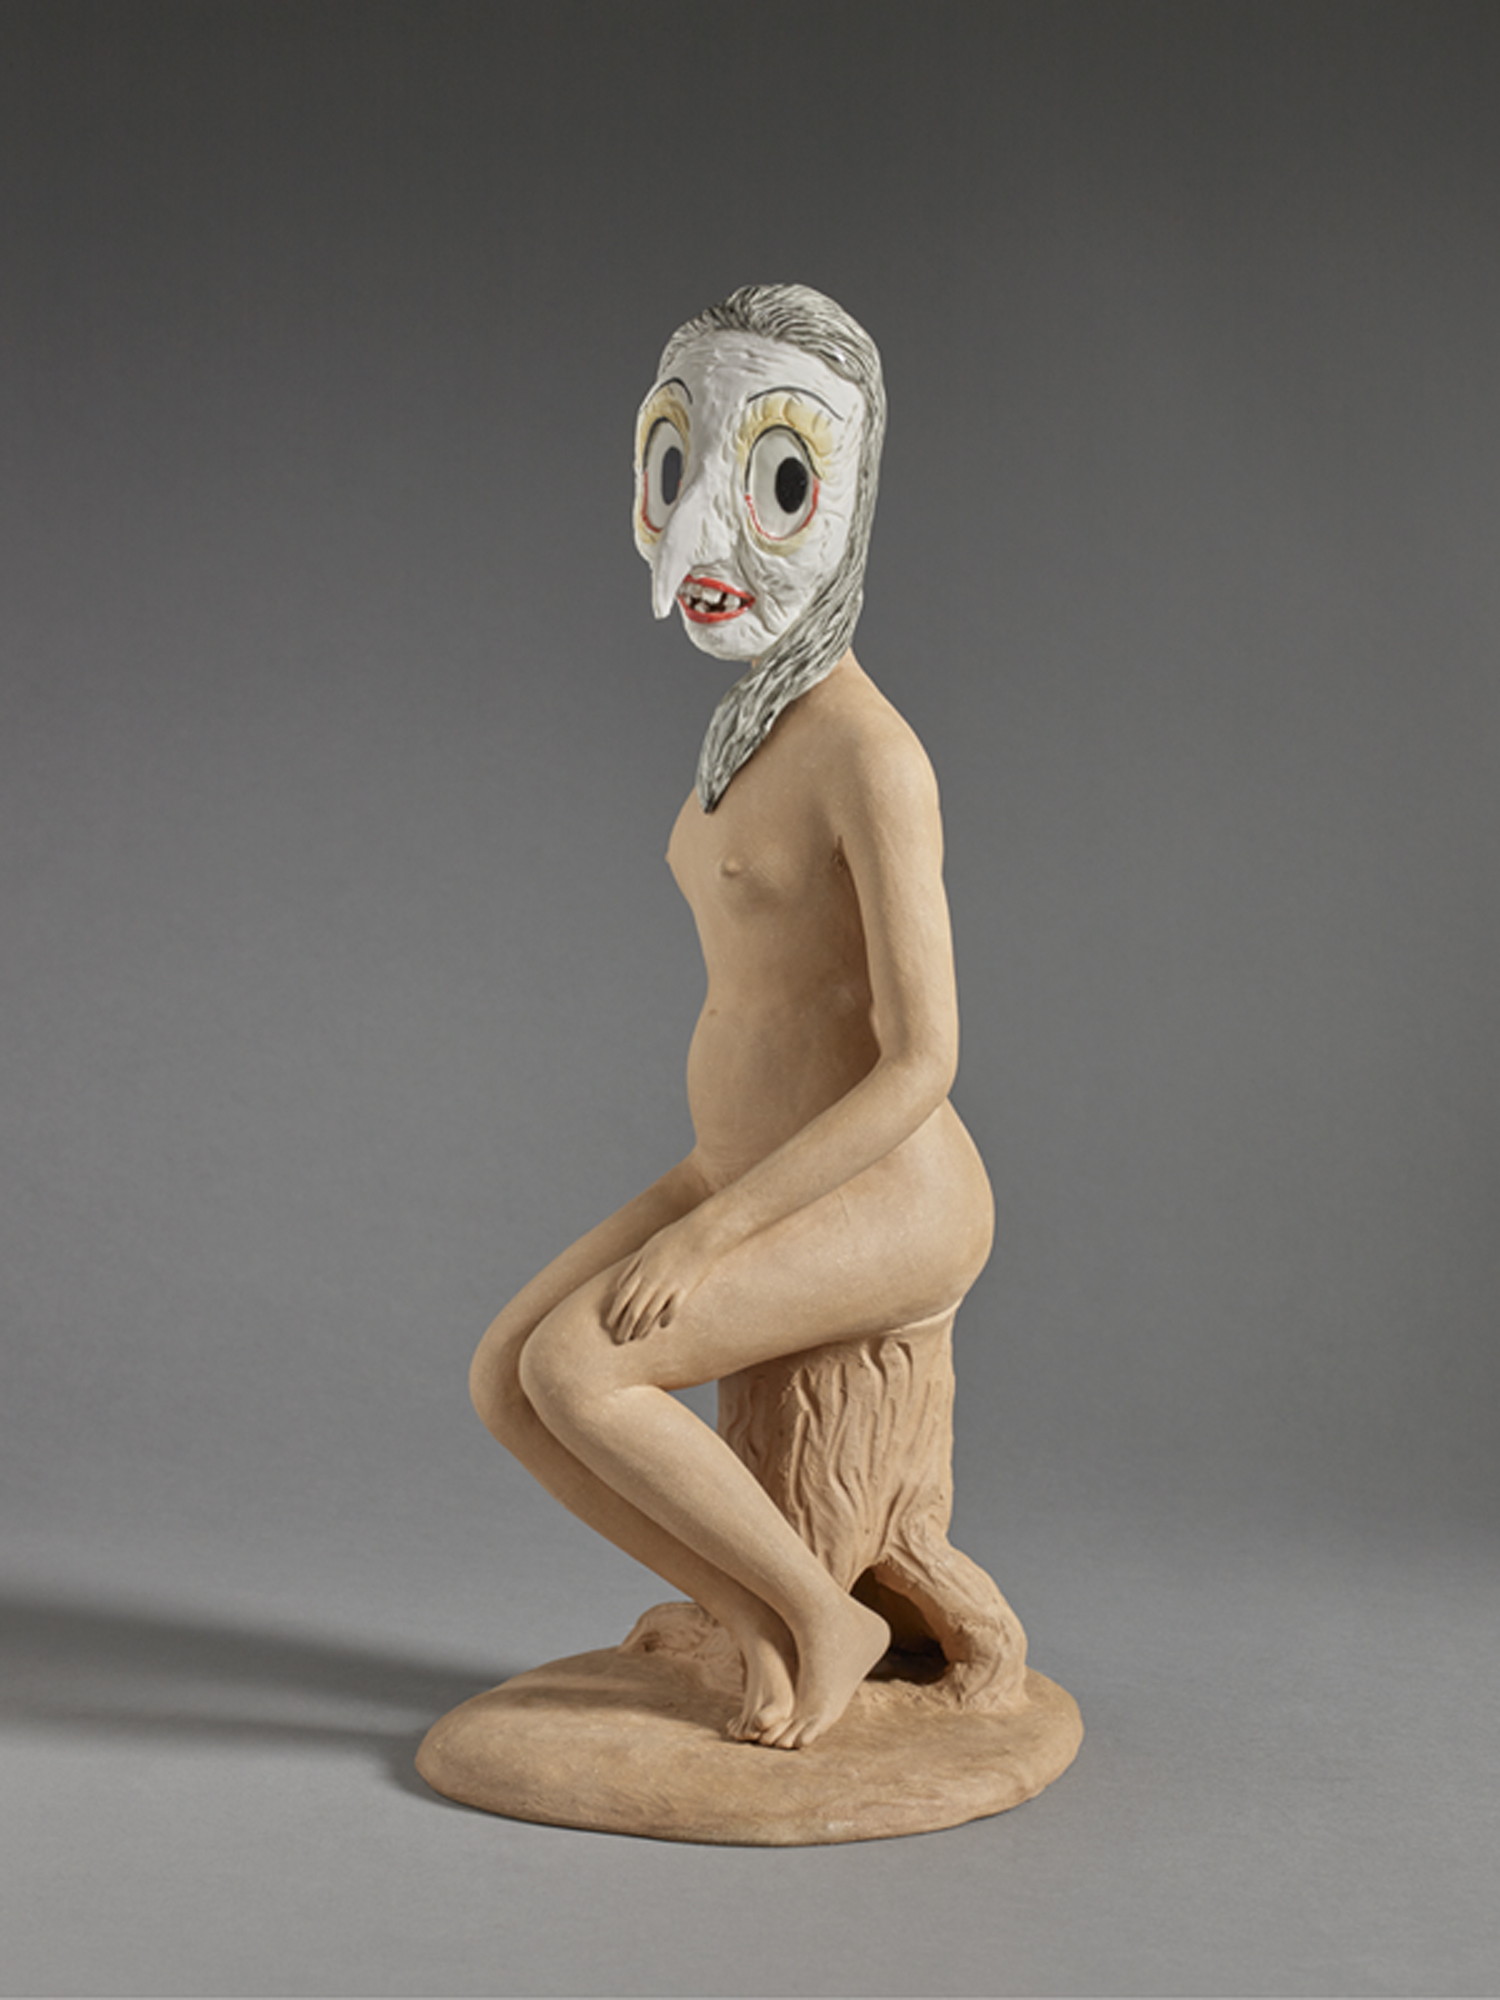 Shary Boyle's Looney Tunes (2016) is a ceramic sculpture of a young nude maiden seated on a tree stump, her body and setting are unglazed terracotta while her head is that of a cartoonish witch rendered in brightly glazed ceramic